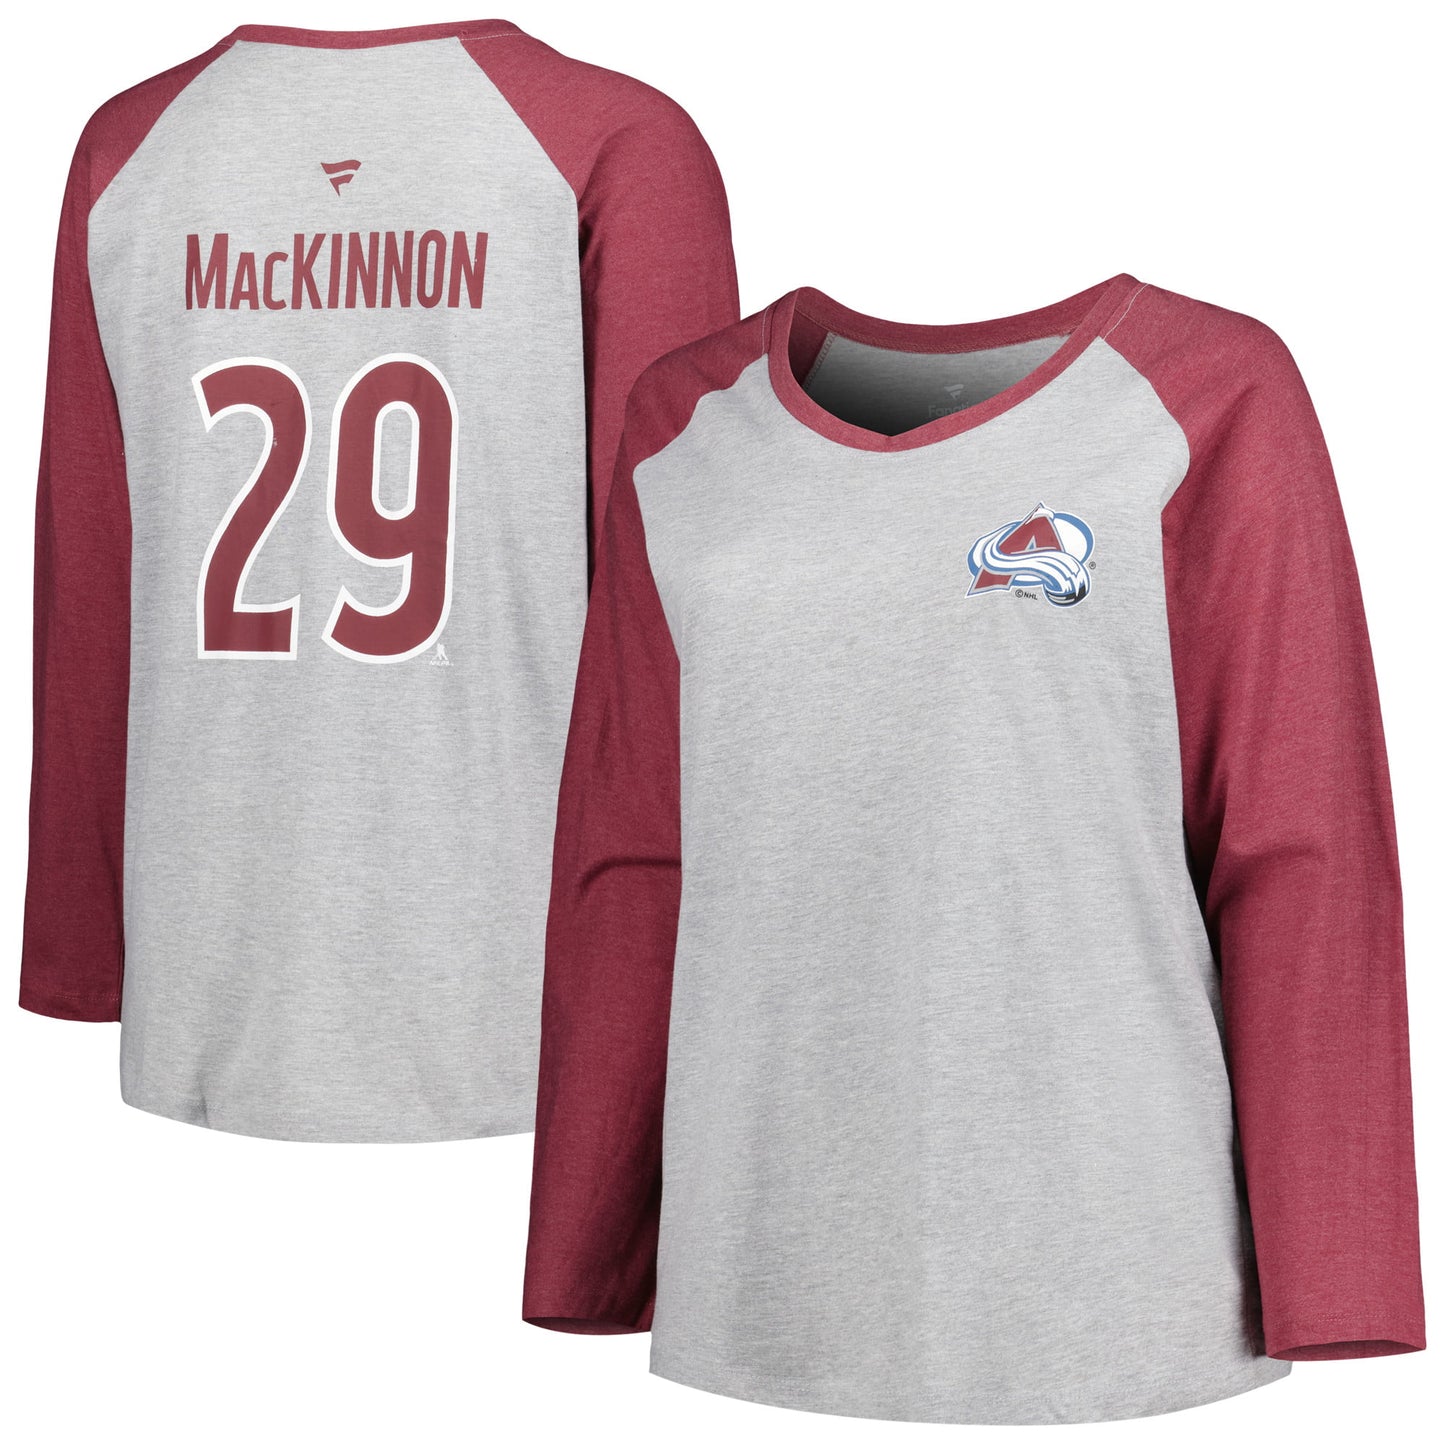 Women's Fanatics Branded Nathan MacKinnon Heather Gray/Heather Burgundy Colorado Avalanche Plus Size Name & Number